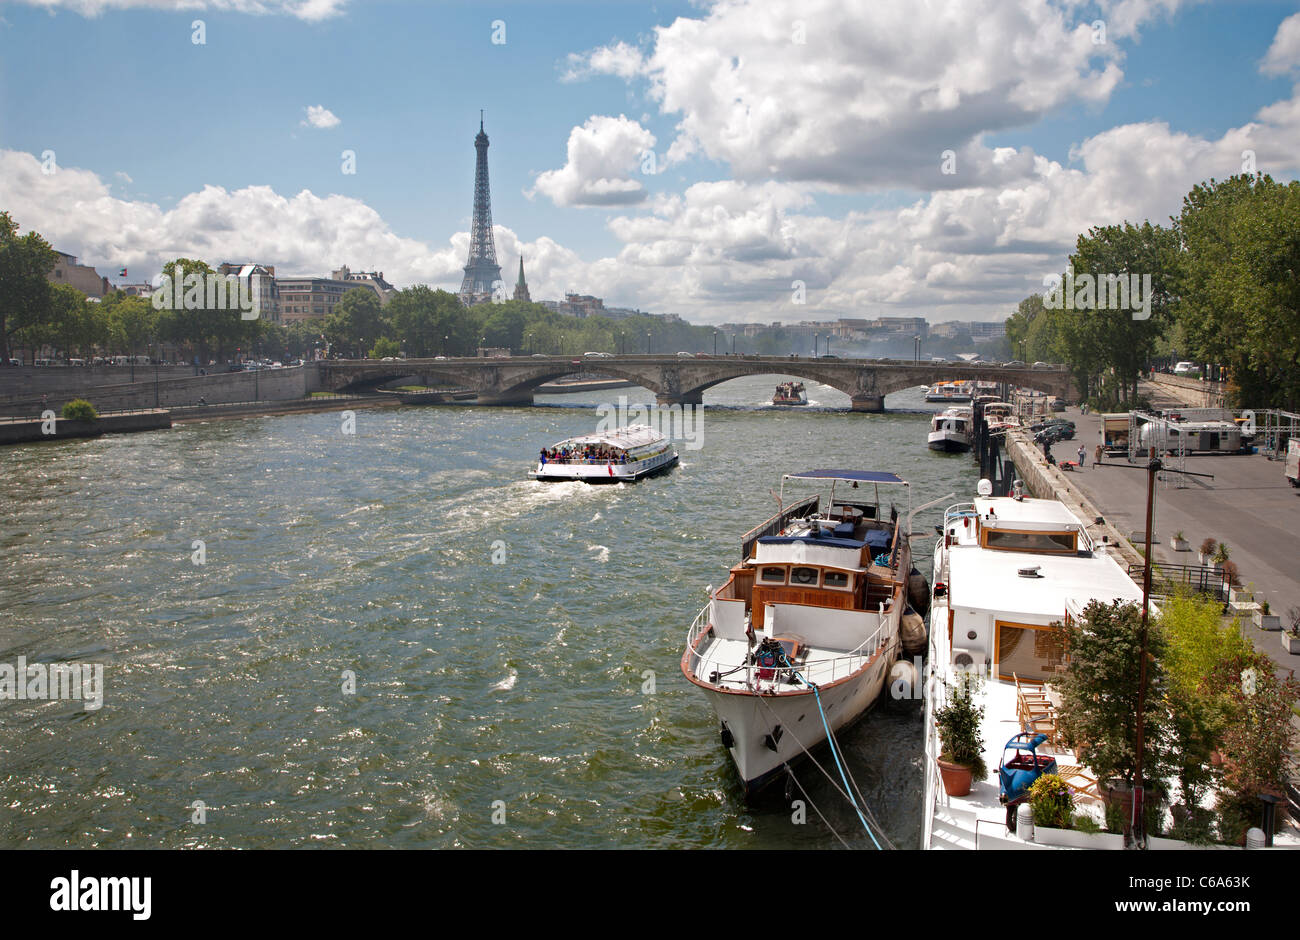 Paris - Eiffel tower and ships on Seine Stock Photo